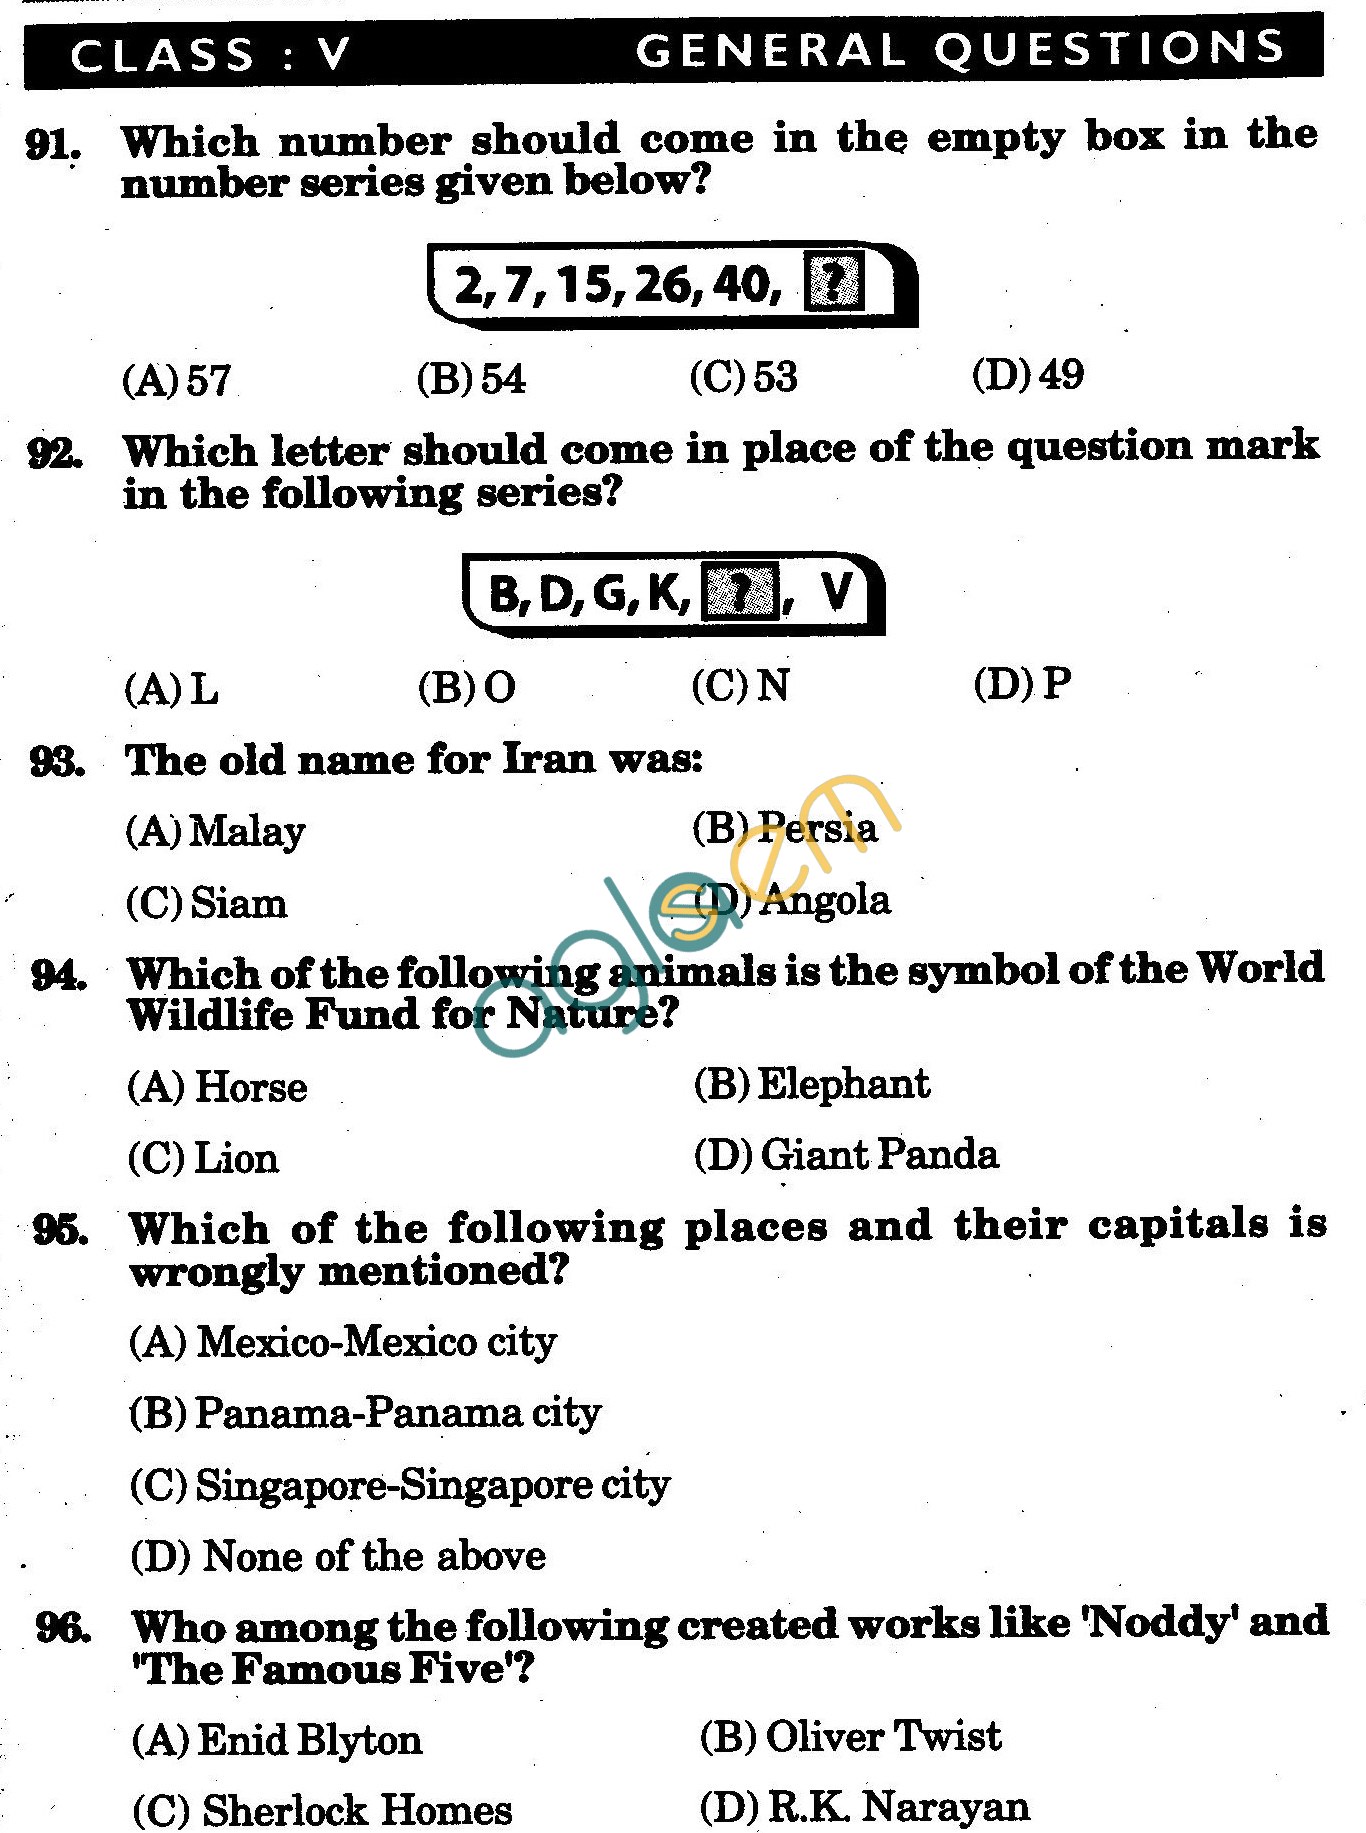 NSTSE 2010 Class V Question Paper with Answers - General Knowledge